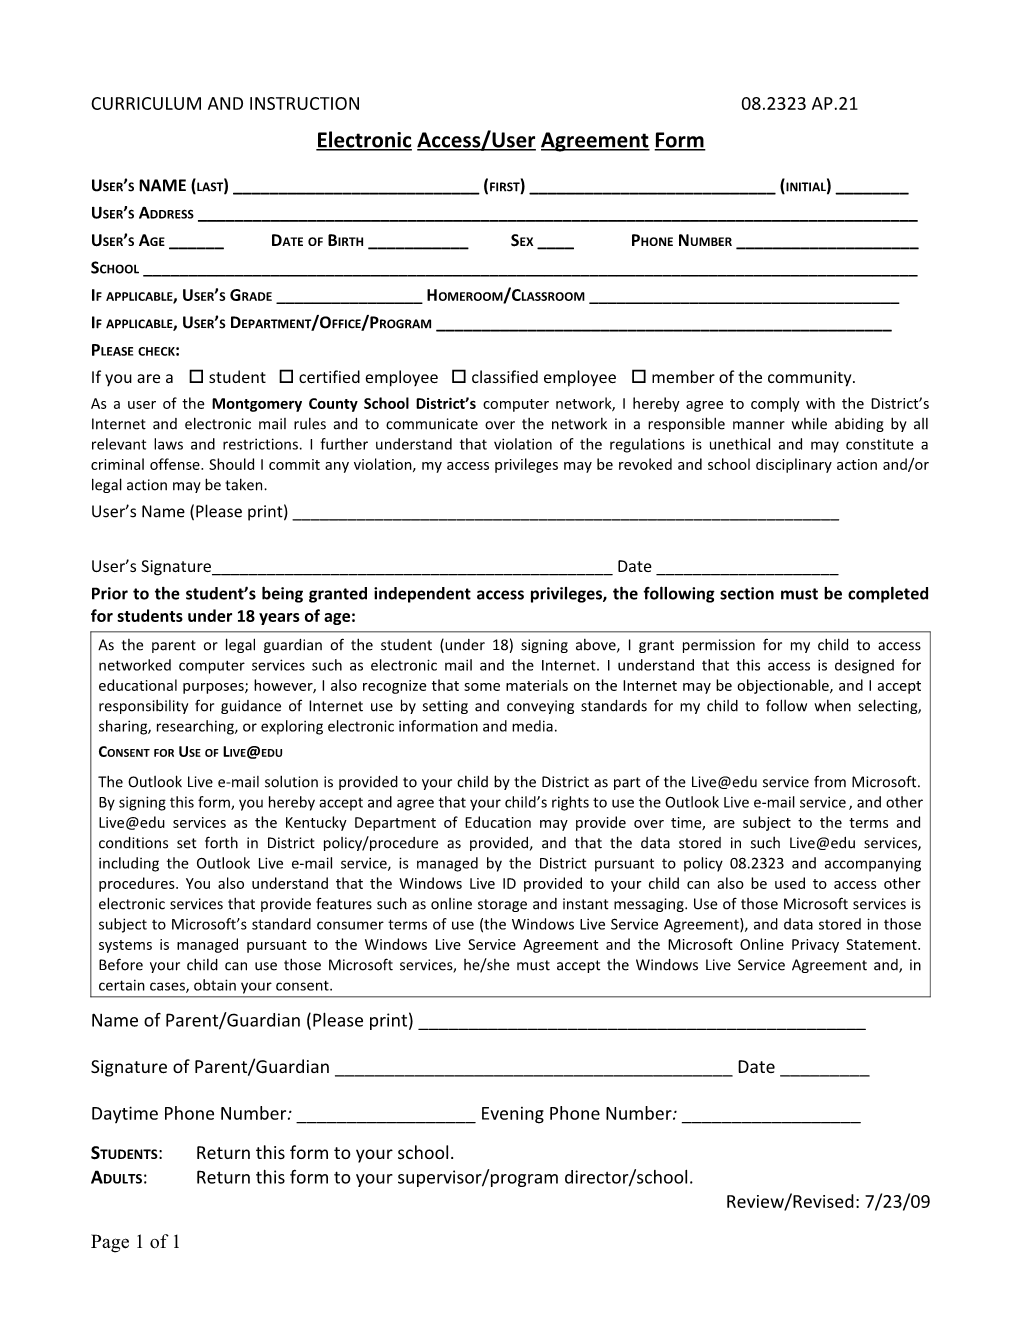 Electronic Access/User Agreement Form